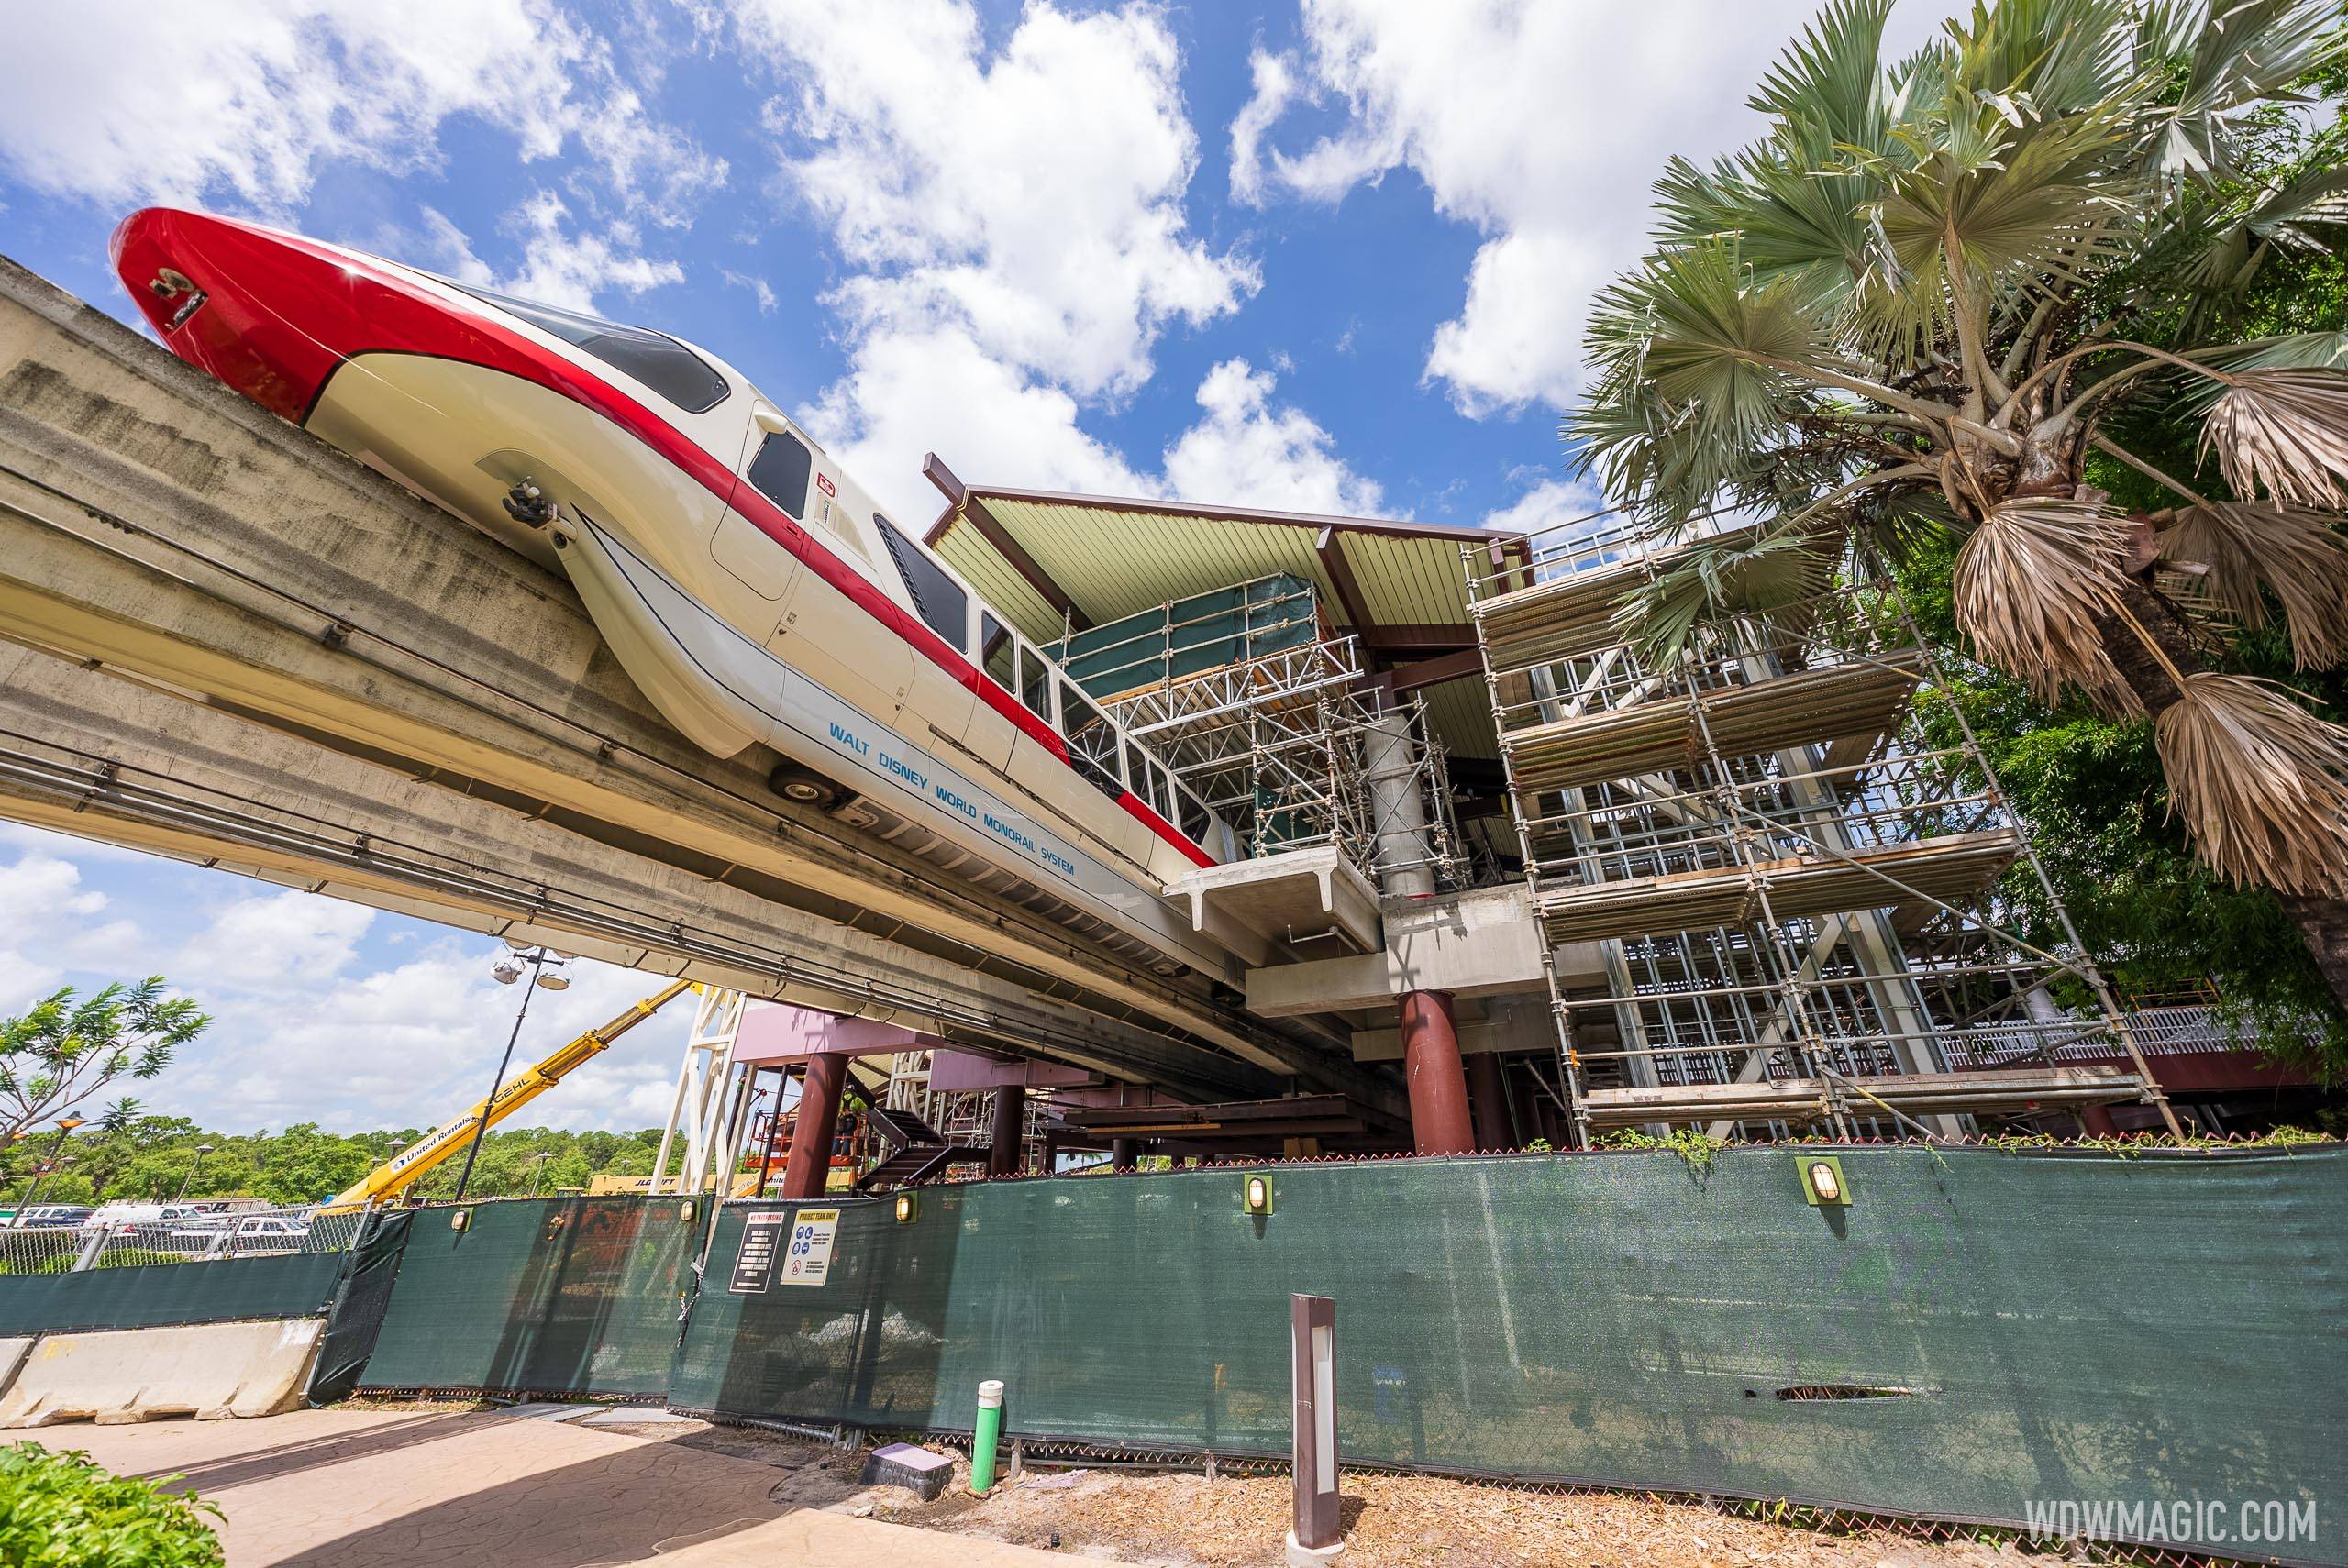 The monorail passing through the station at Disney's Polynesian Resort earlier this week